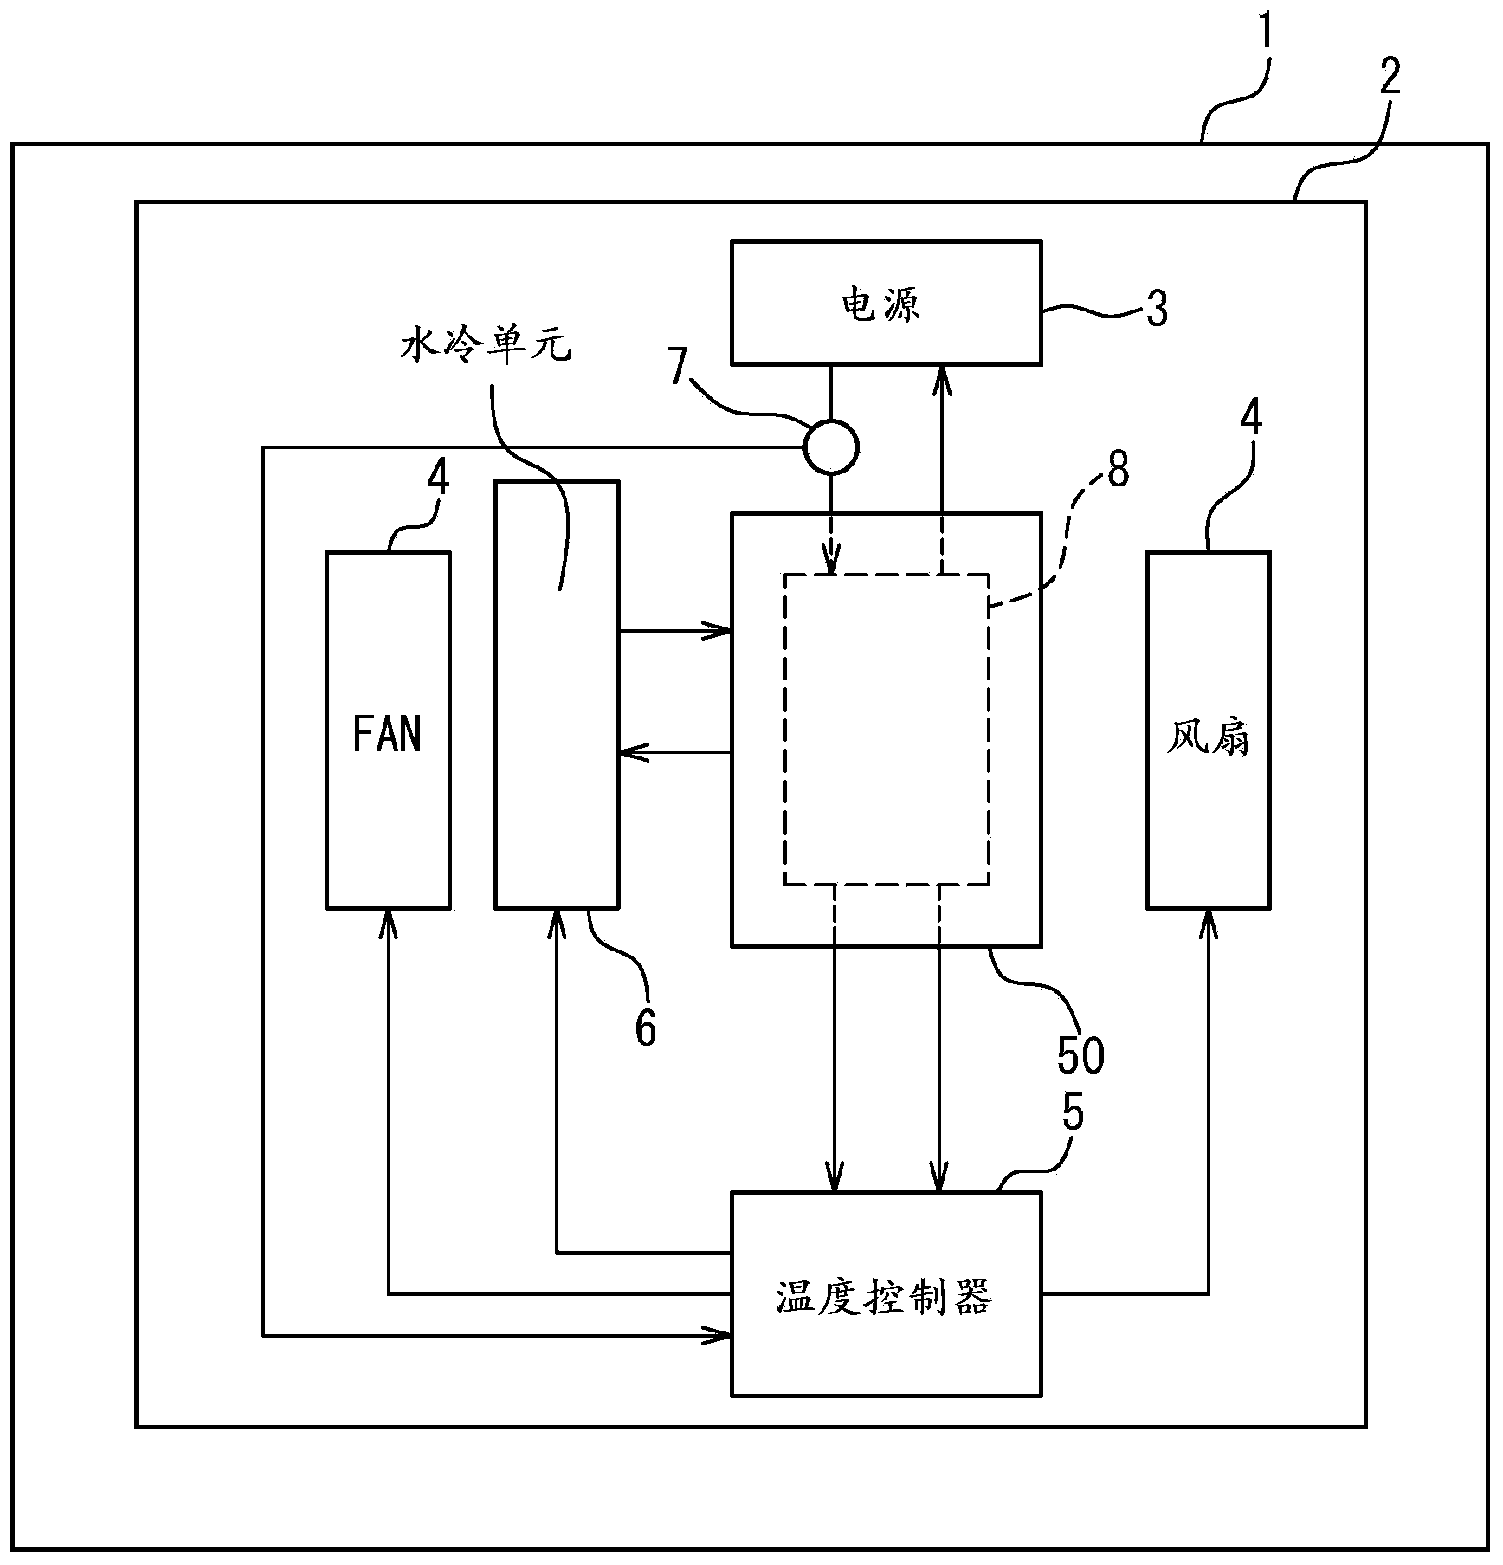 Heat sink and electronic apparatus provided with heat sink